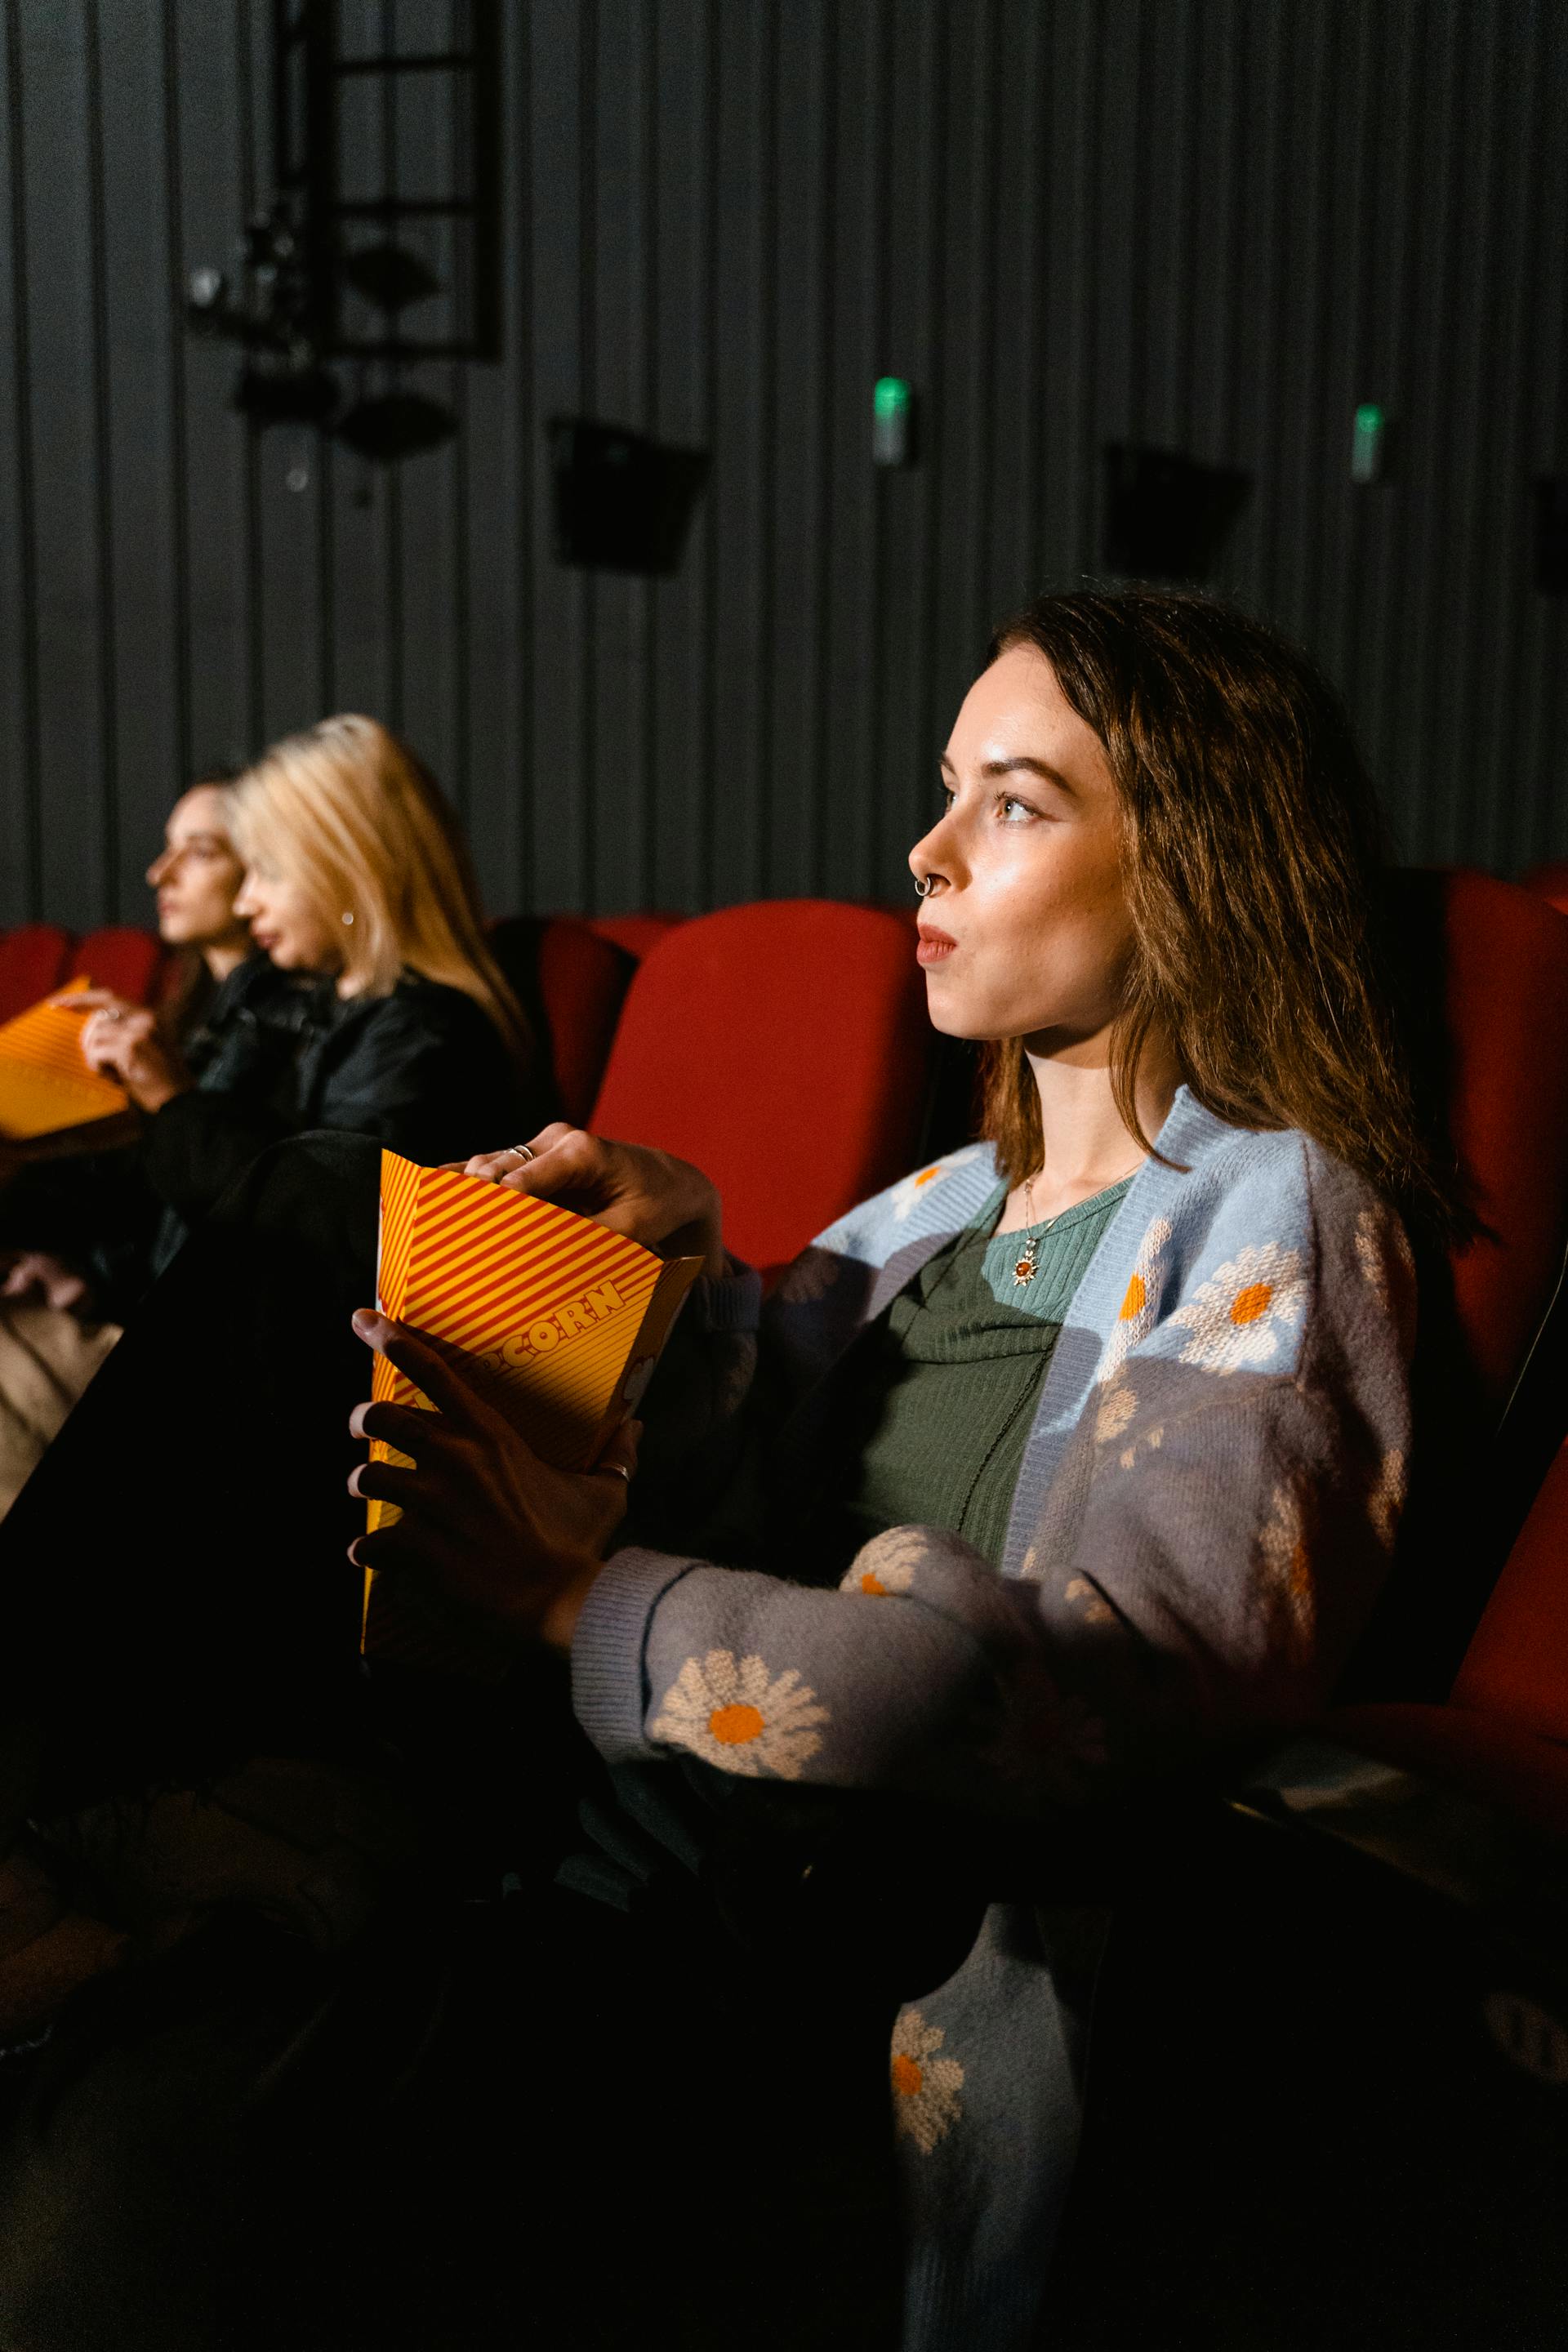 Women at a movie theatre | Source: Pexels